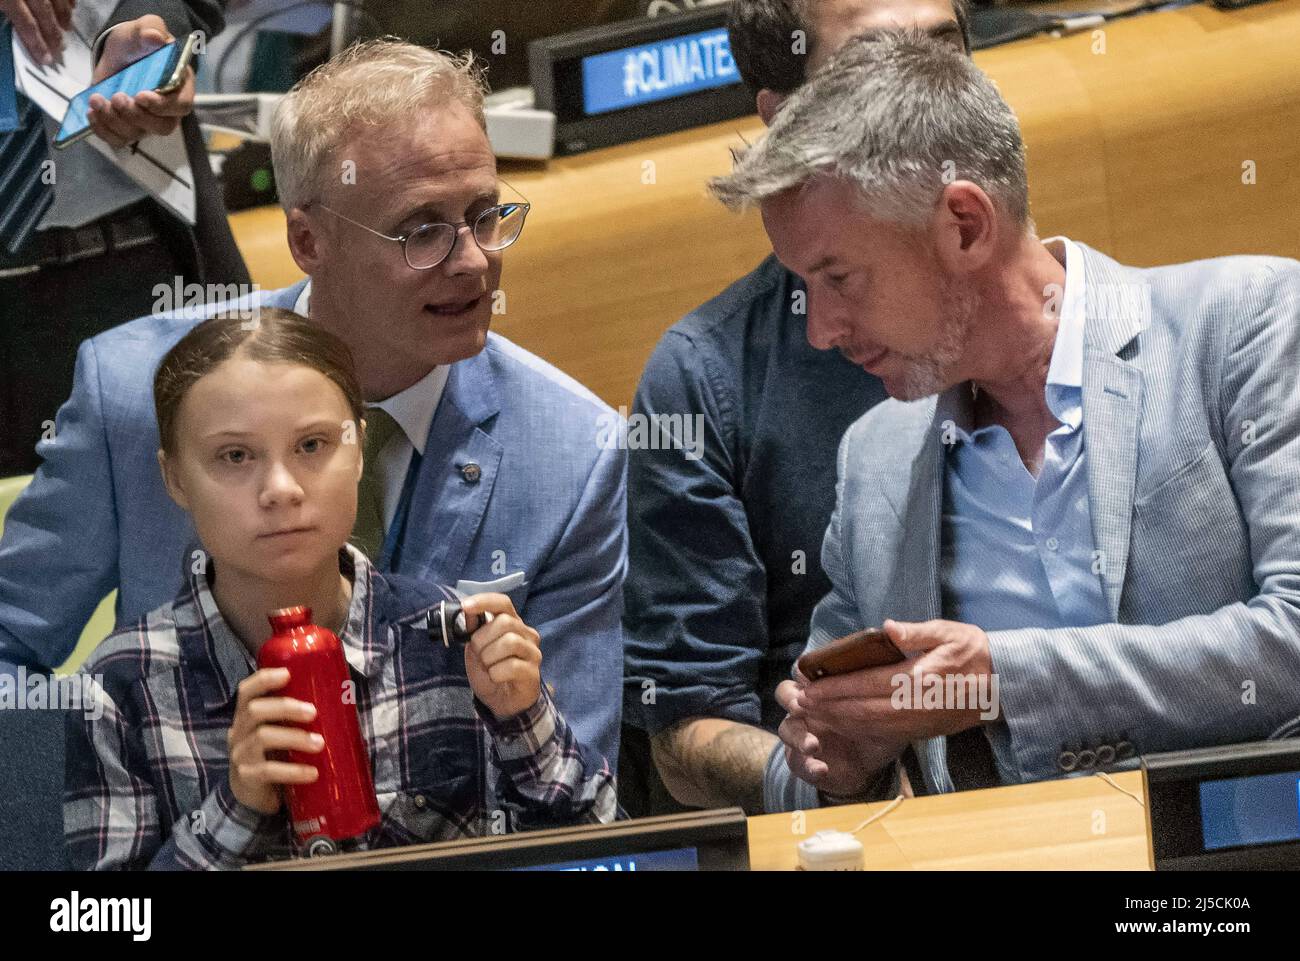 USA, New York, Sept. 21, 2019. opening the first United Nations Youth Climate Summit with Antonio Manuel de Oliveira Guterres, Secretary General of the United Nations in New York on Sept. 21, 2019. Greta Thunberg, Young Climate Activist. [automated translation] Stock Photo